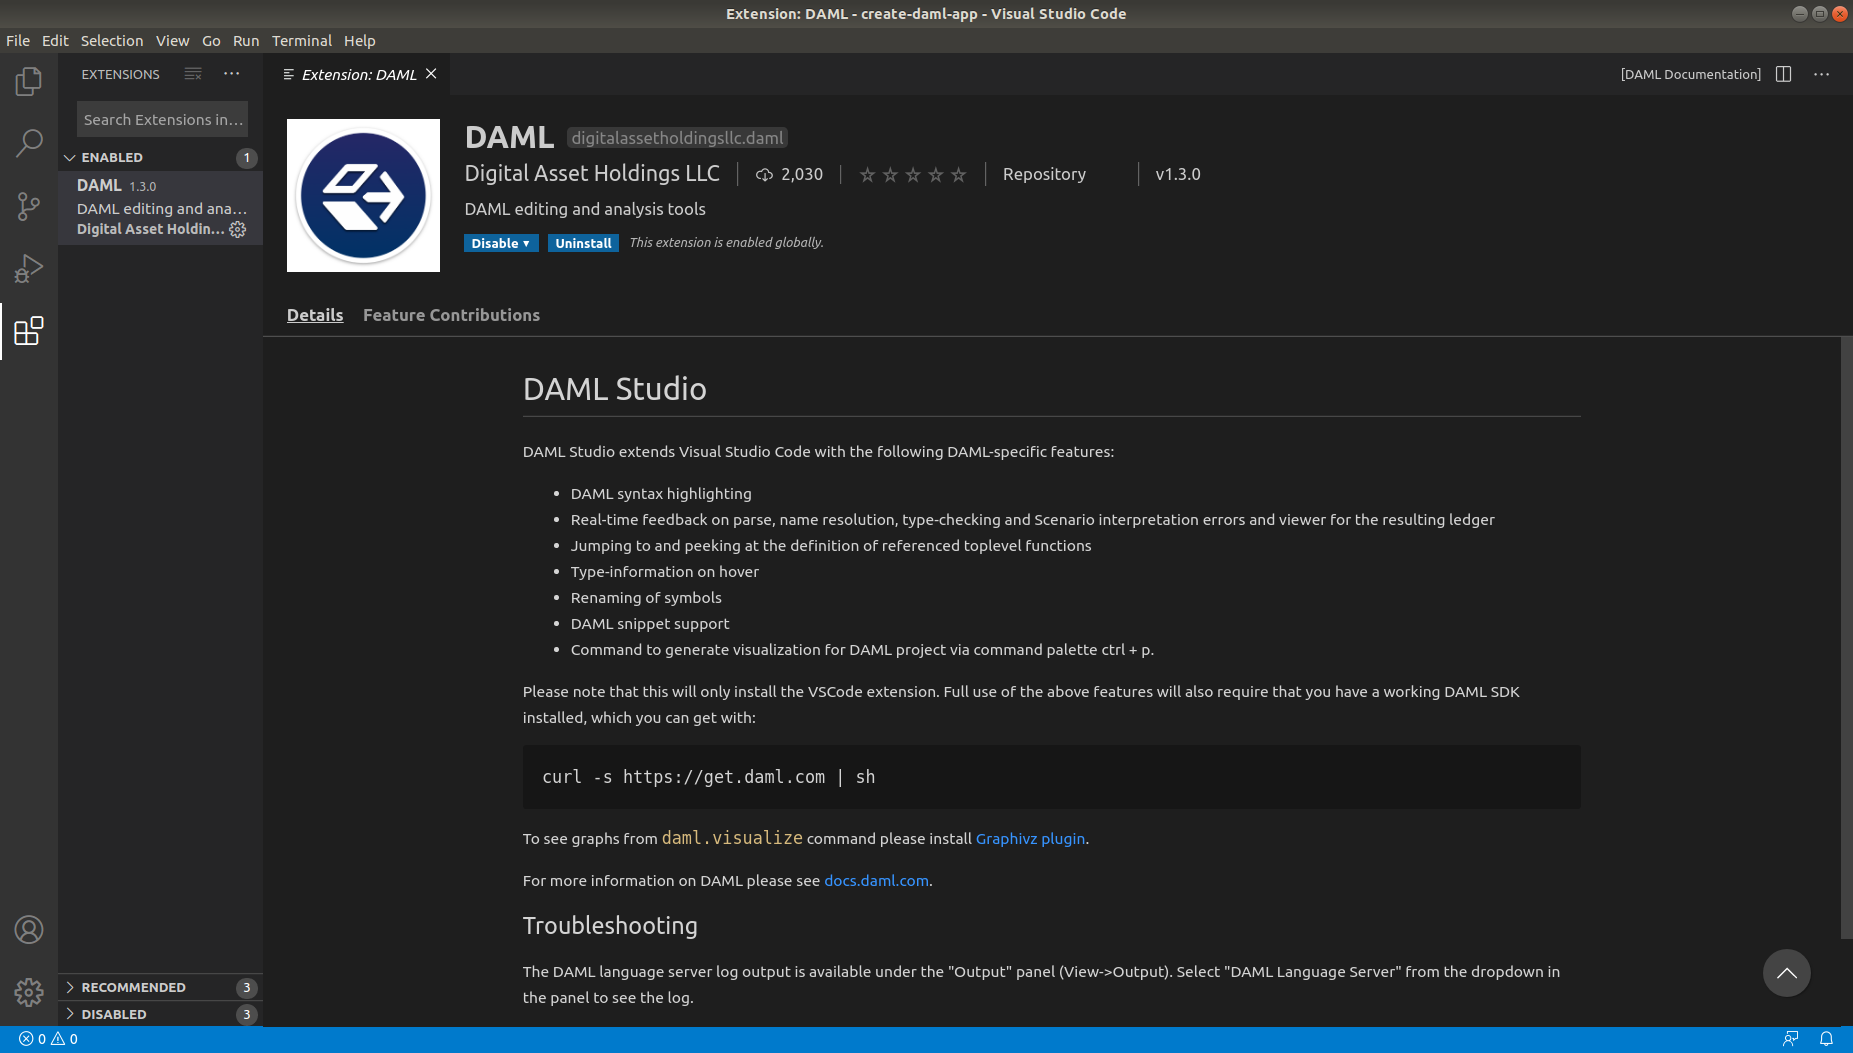 ../_images/daml_studio_extension_view.png